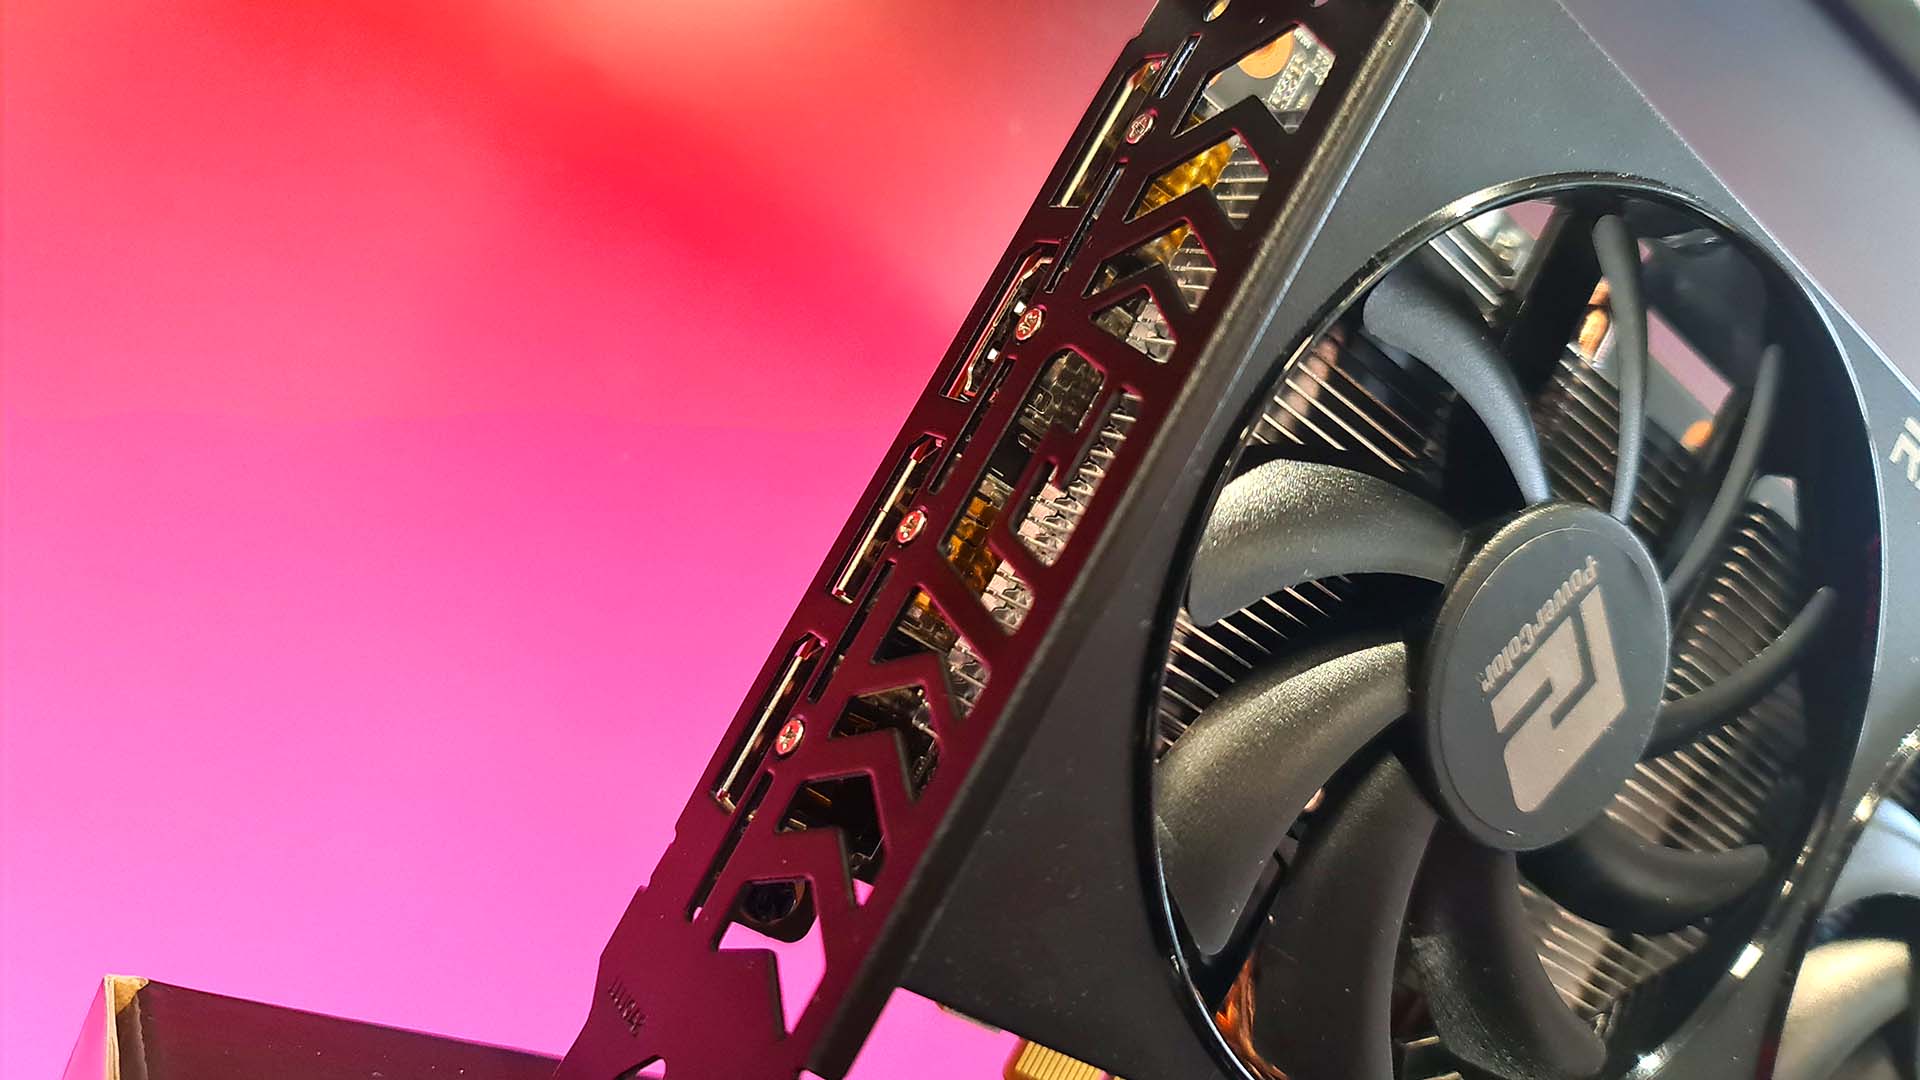 AMD Radeon RX 6600 graphics card on a colored background.